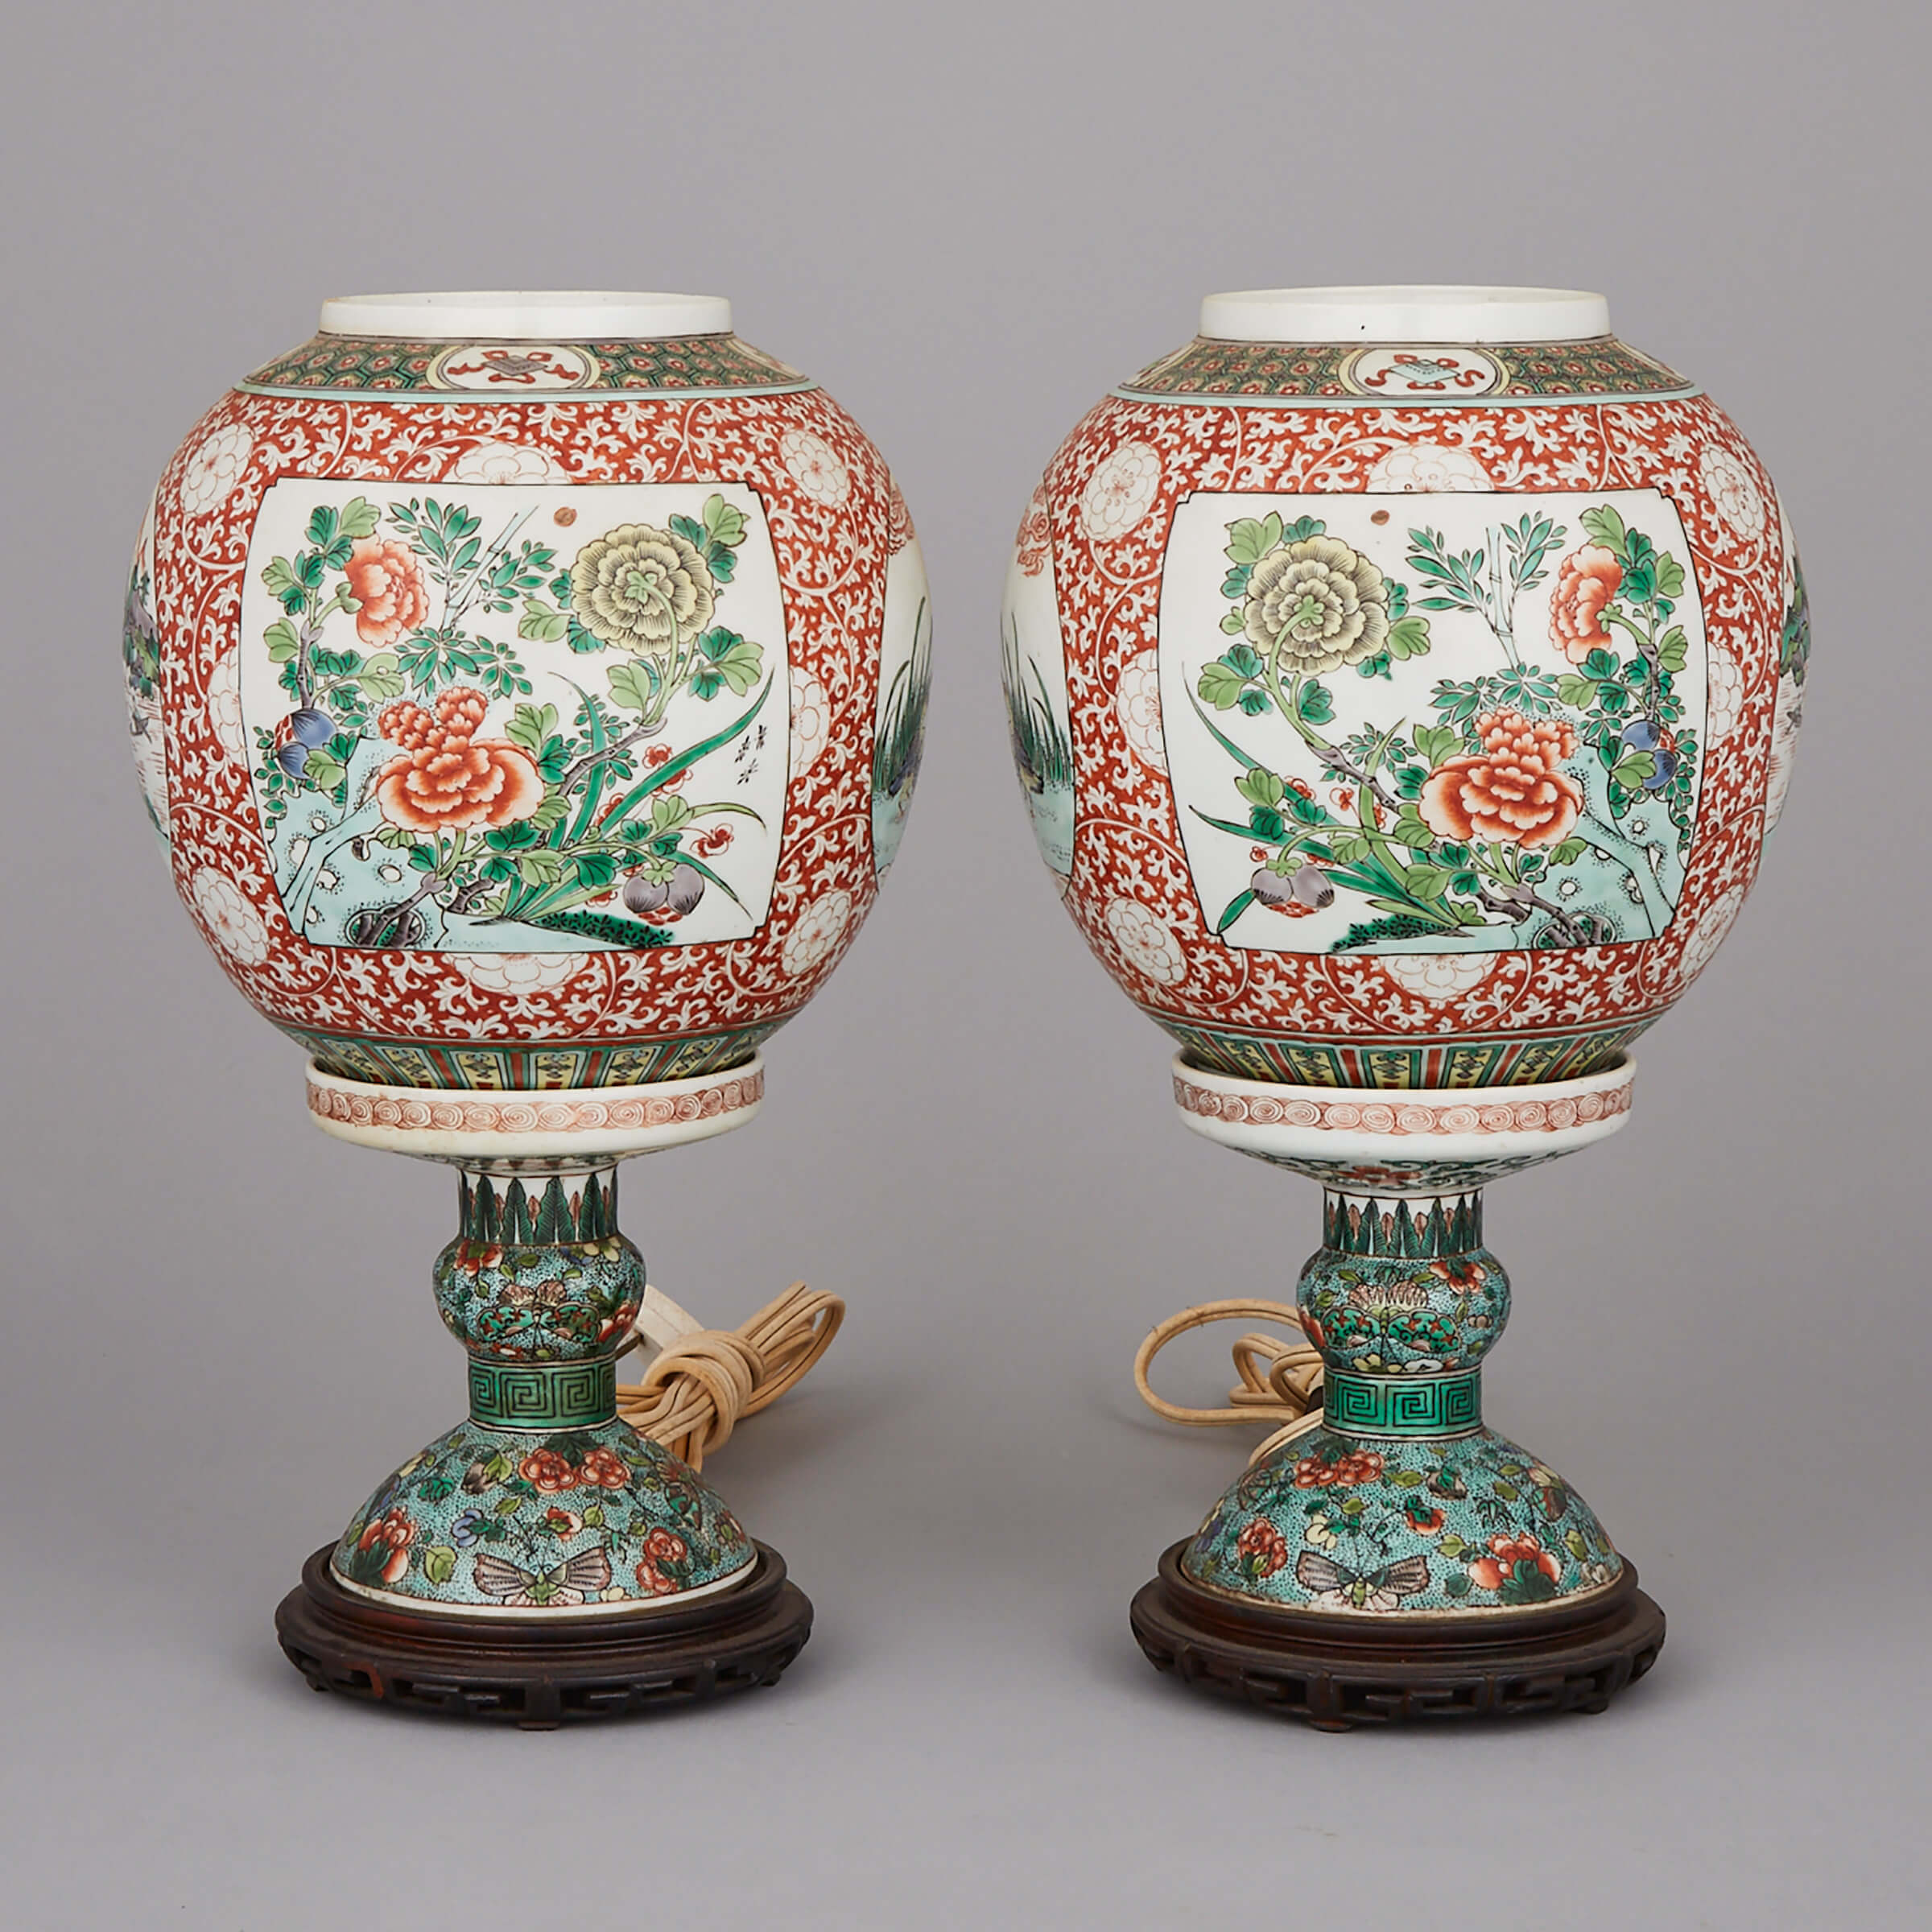 A Pair of Chinese Eggshell Porcelain Lamps